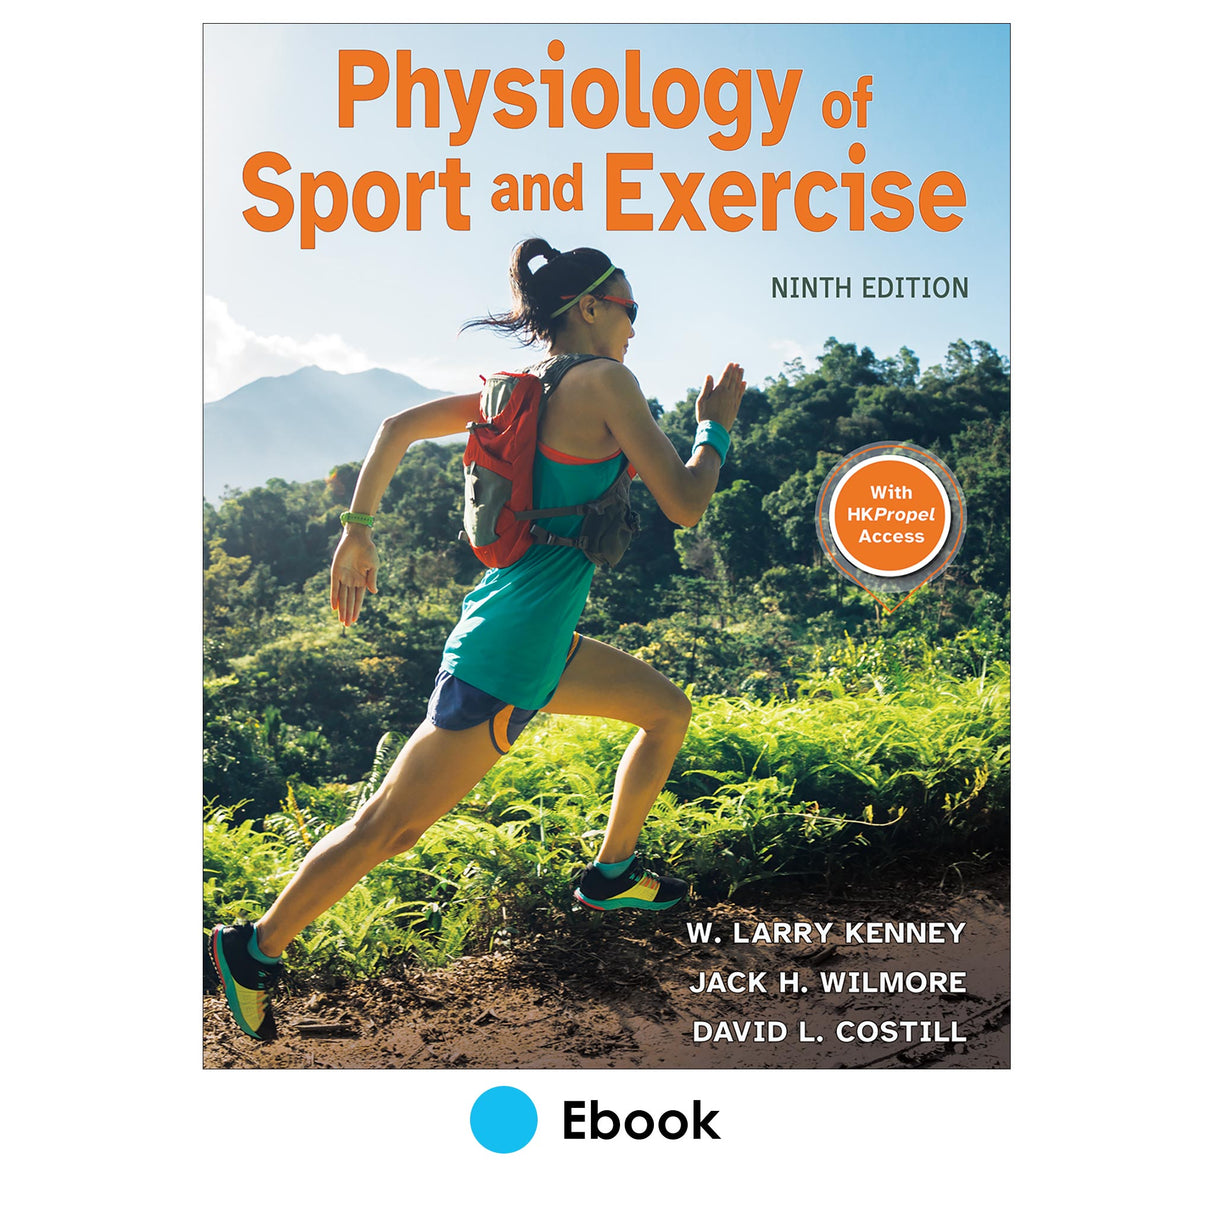 Physiology of Sport and Exercise 9th Edition Ebook With HKPropel Access